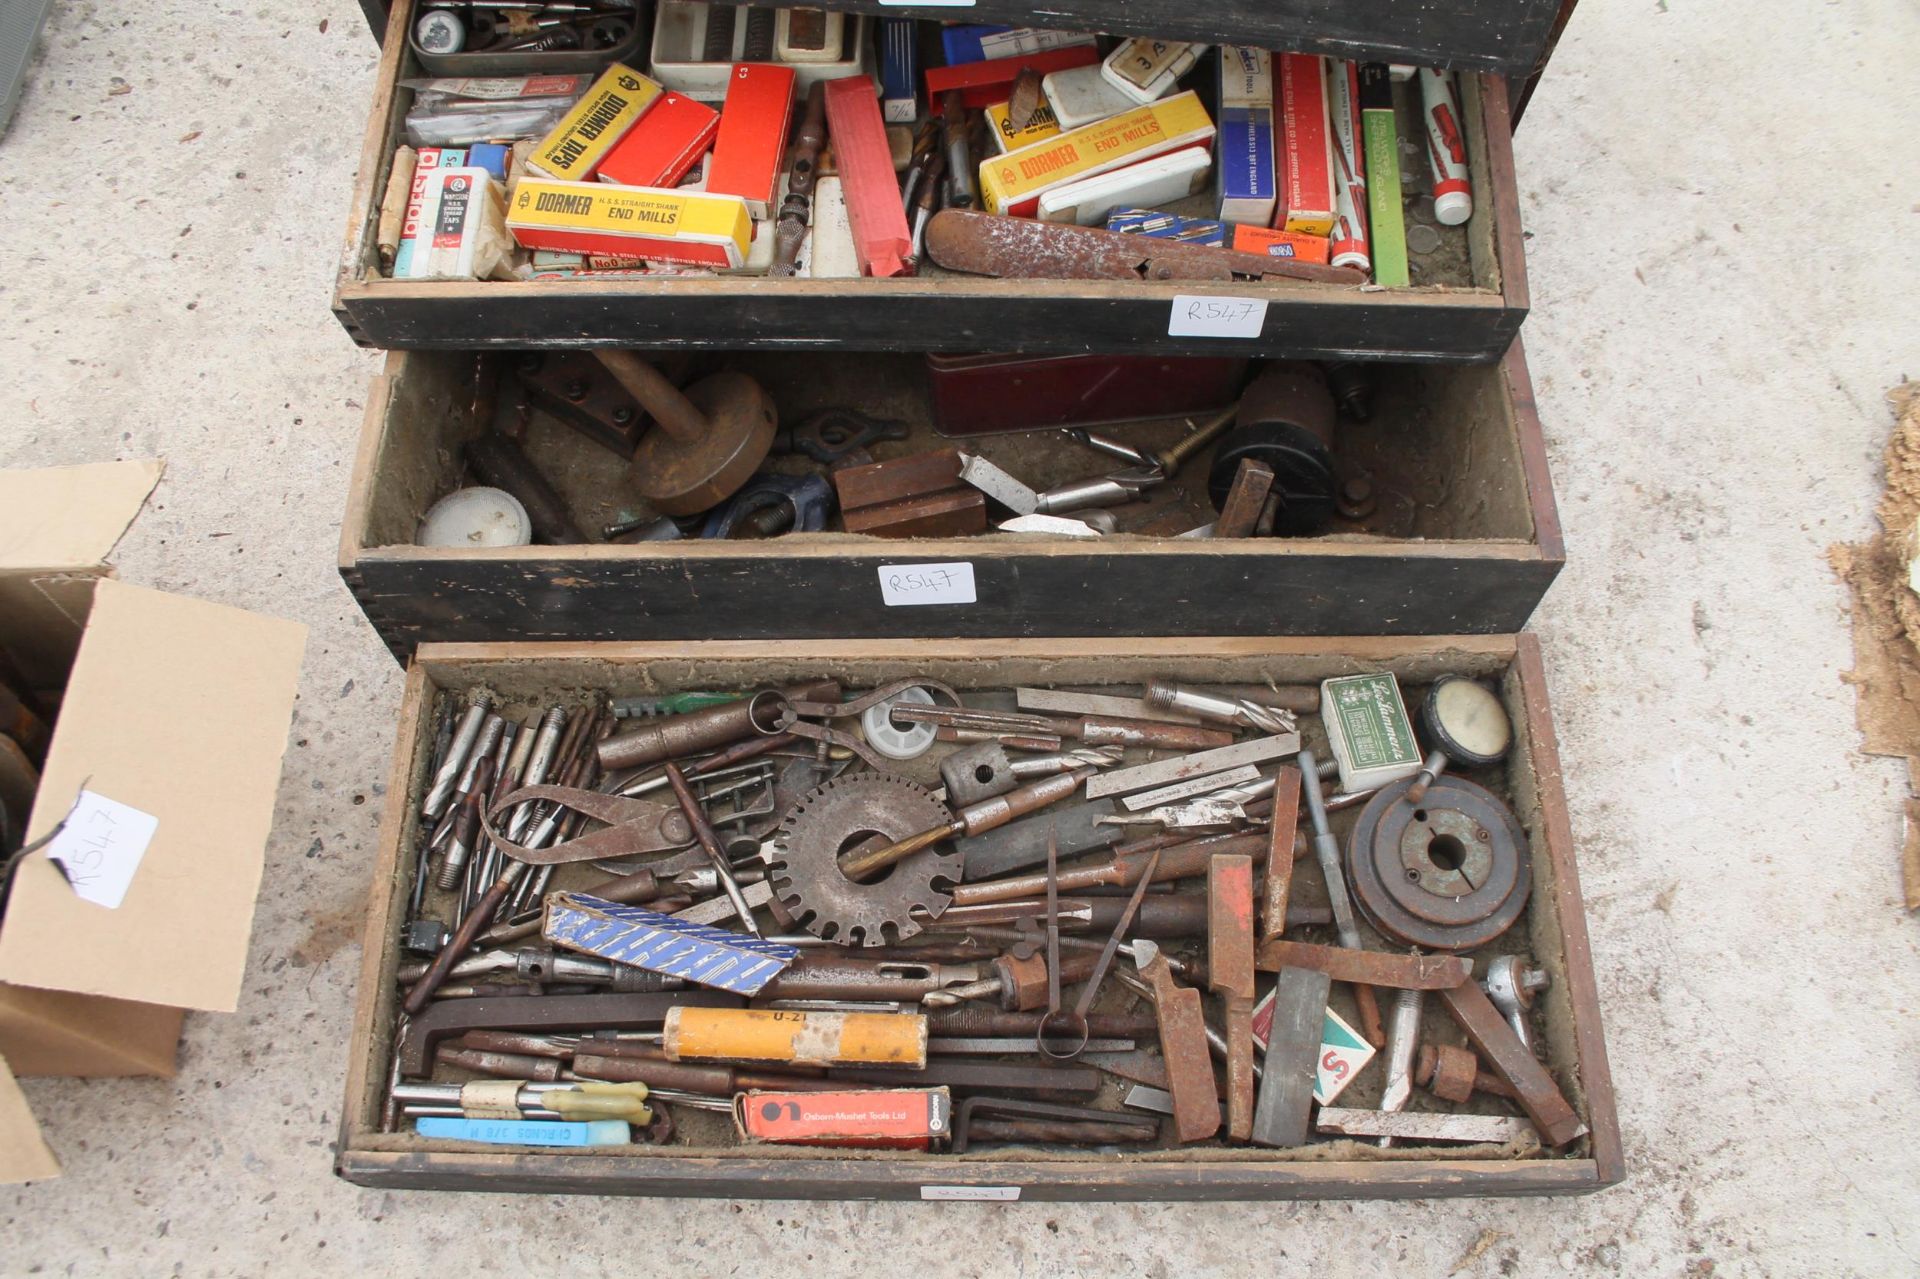 TOOL CHEST, DYES, LATHE, CUTTERS, MICROMETER NO VAT - Image 2 of 3